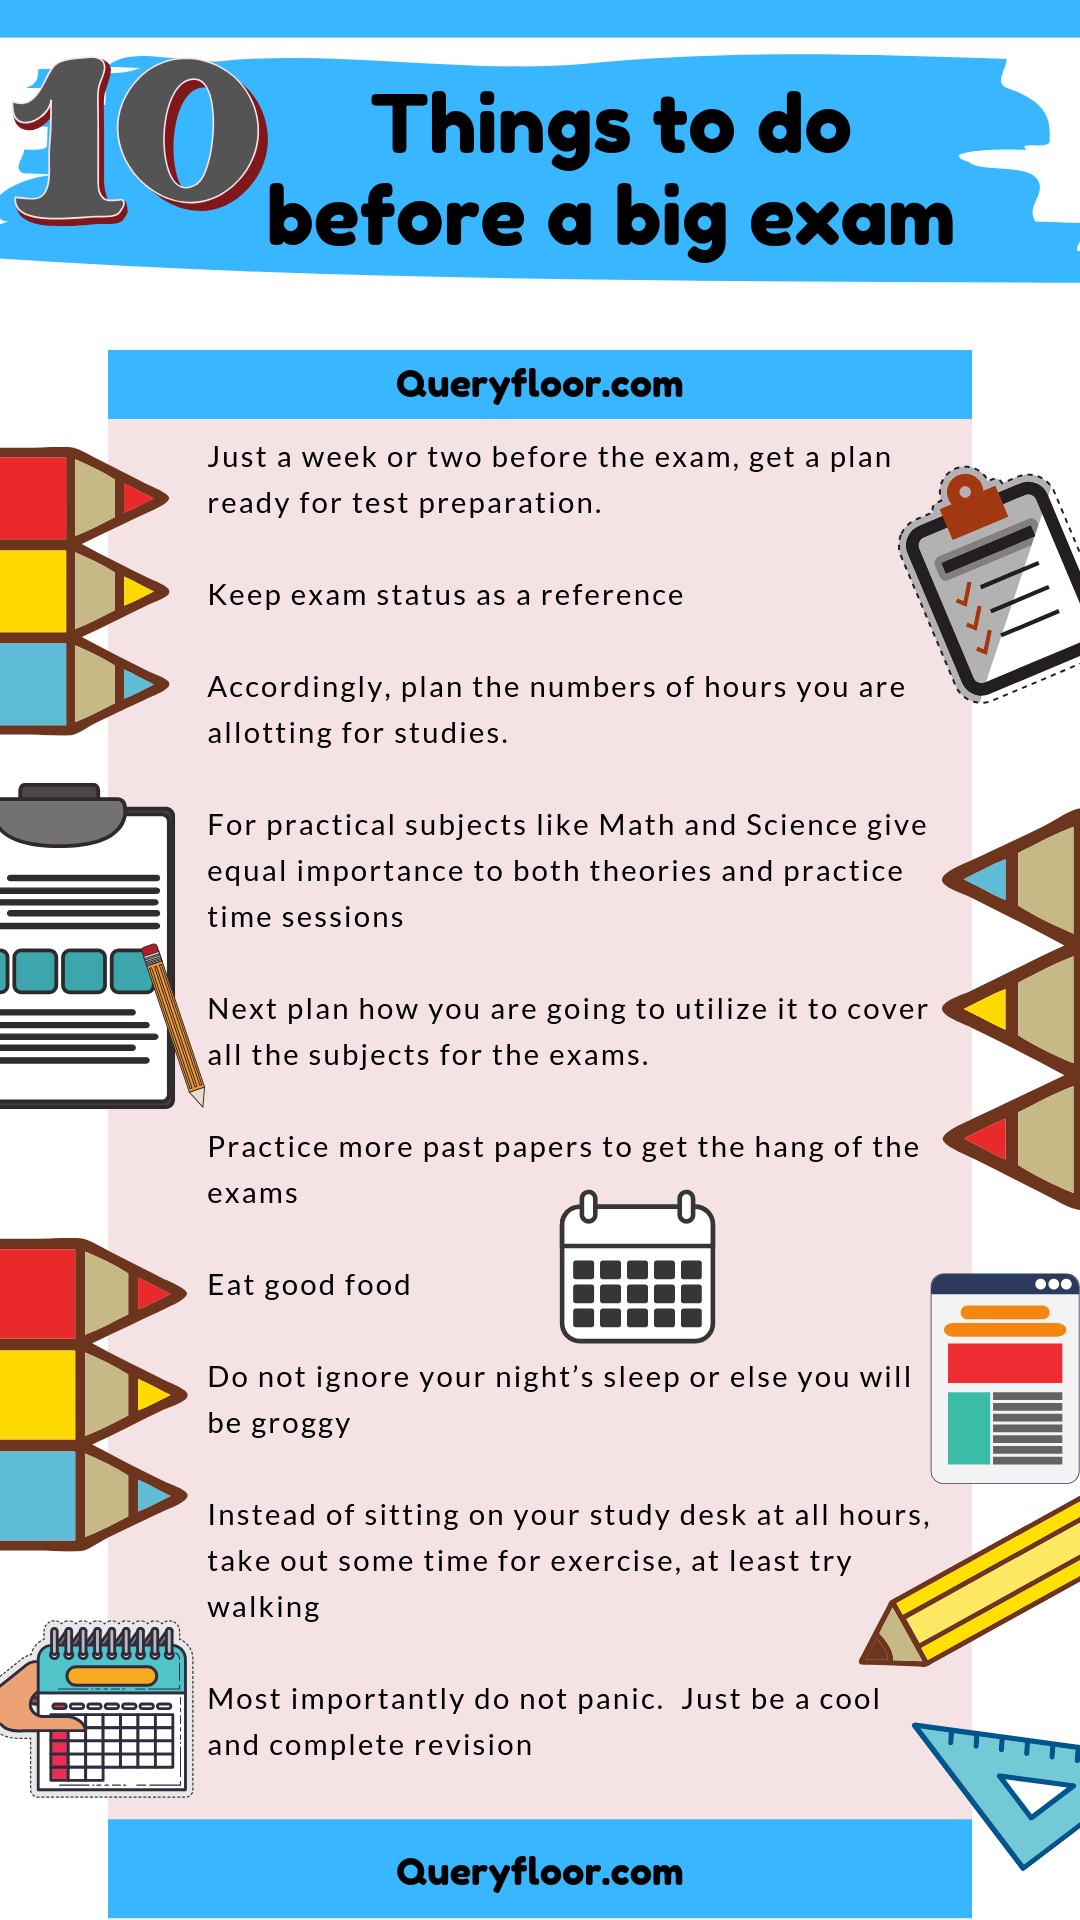 10 things to do before a big exam